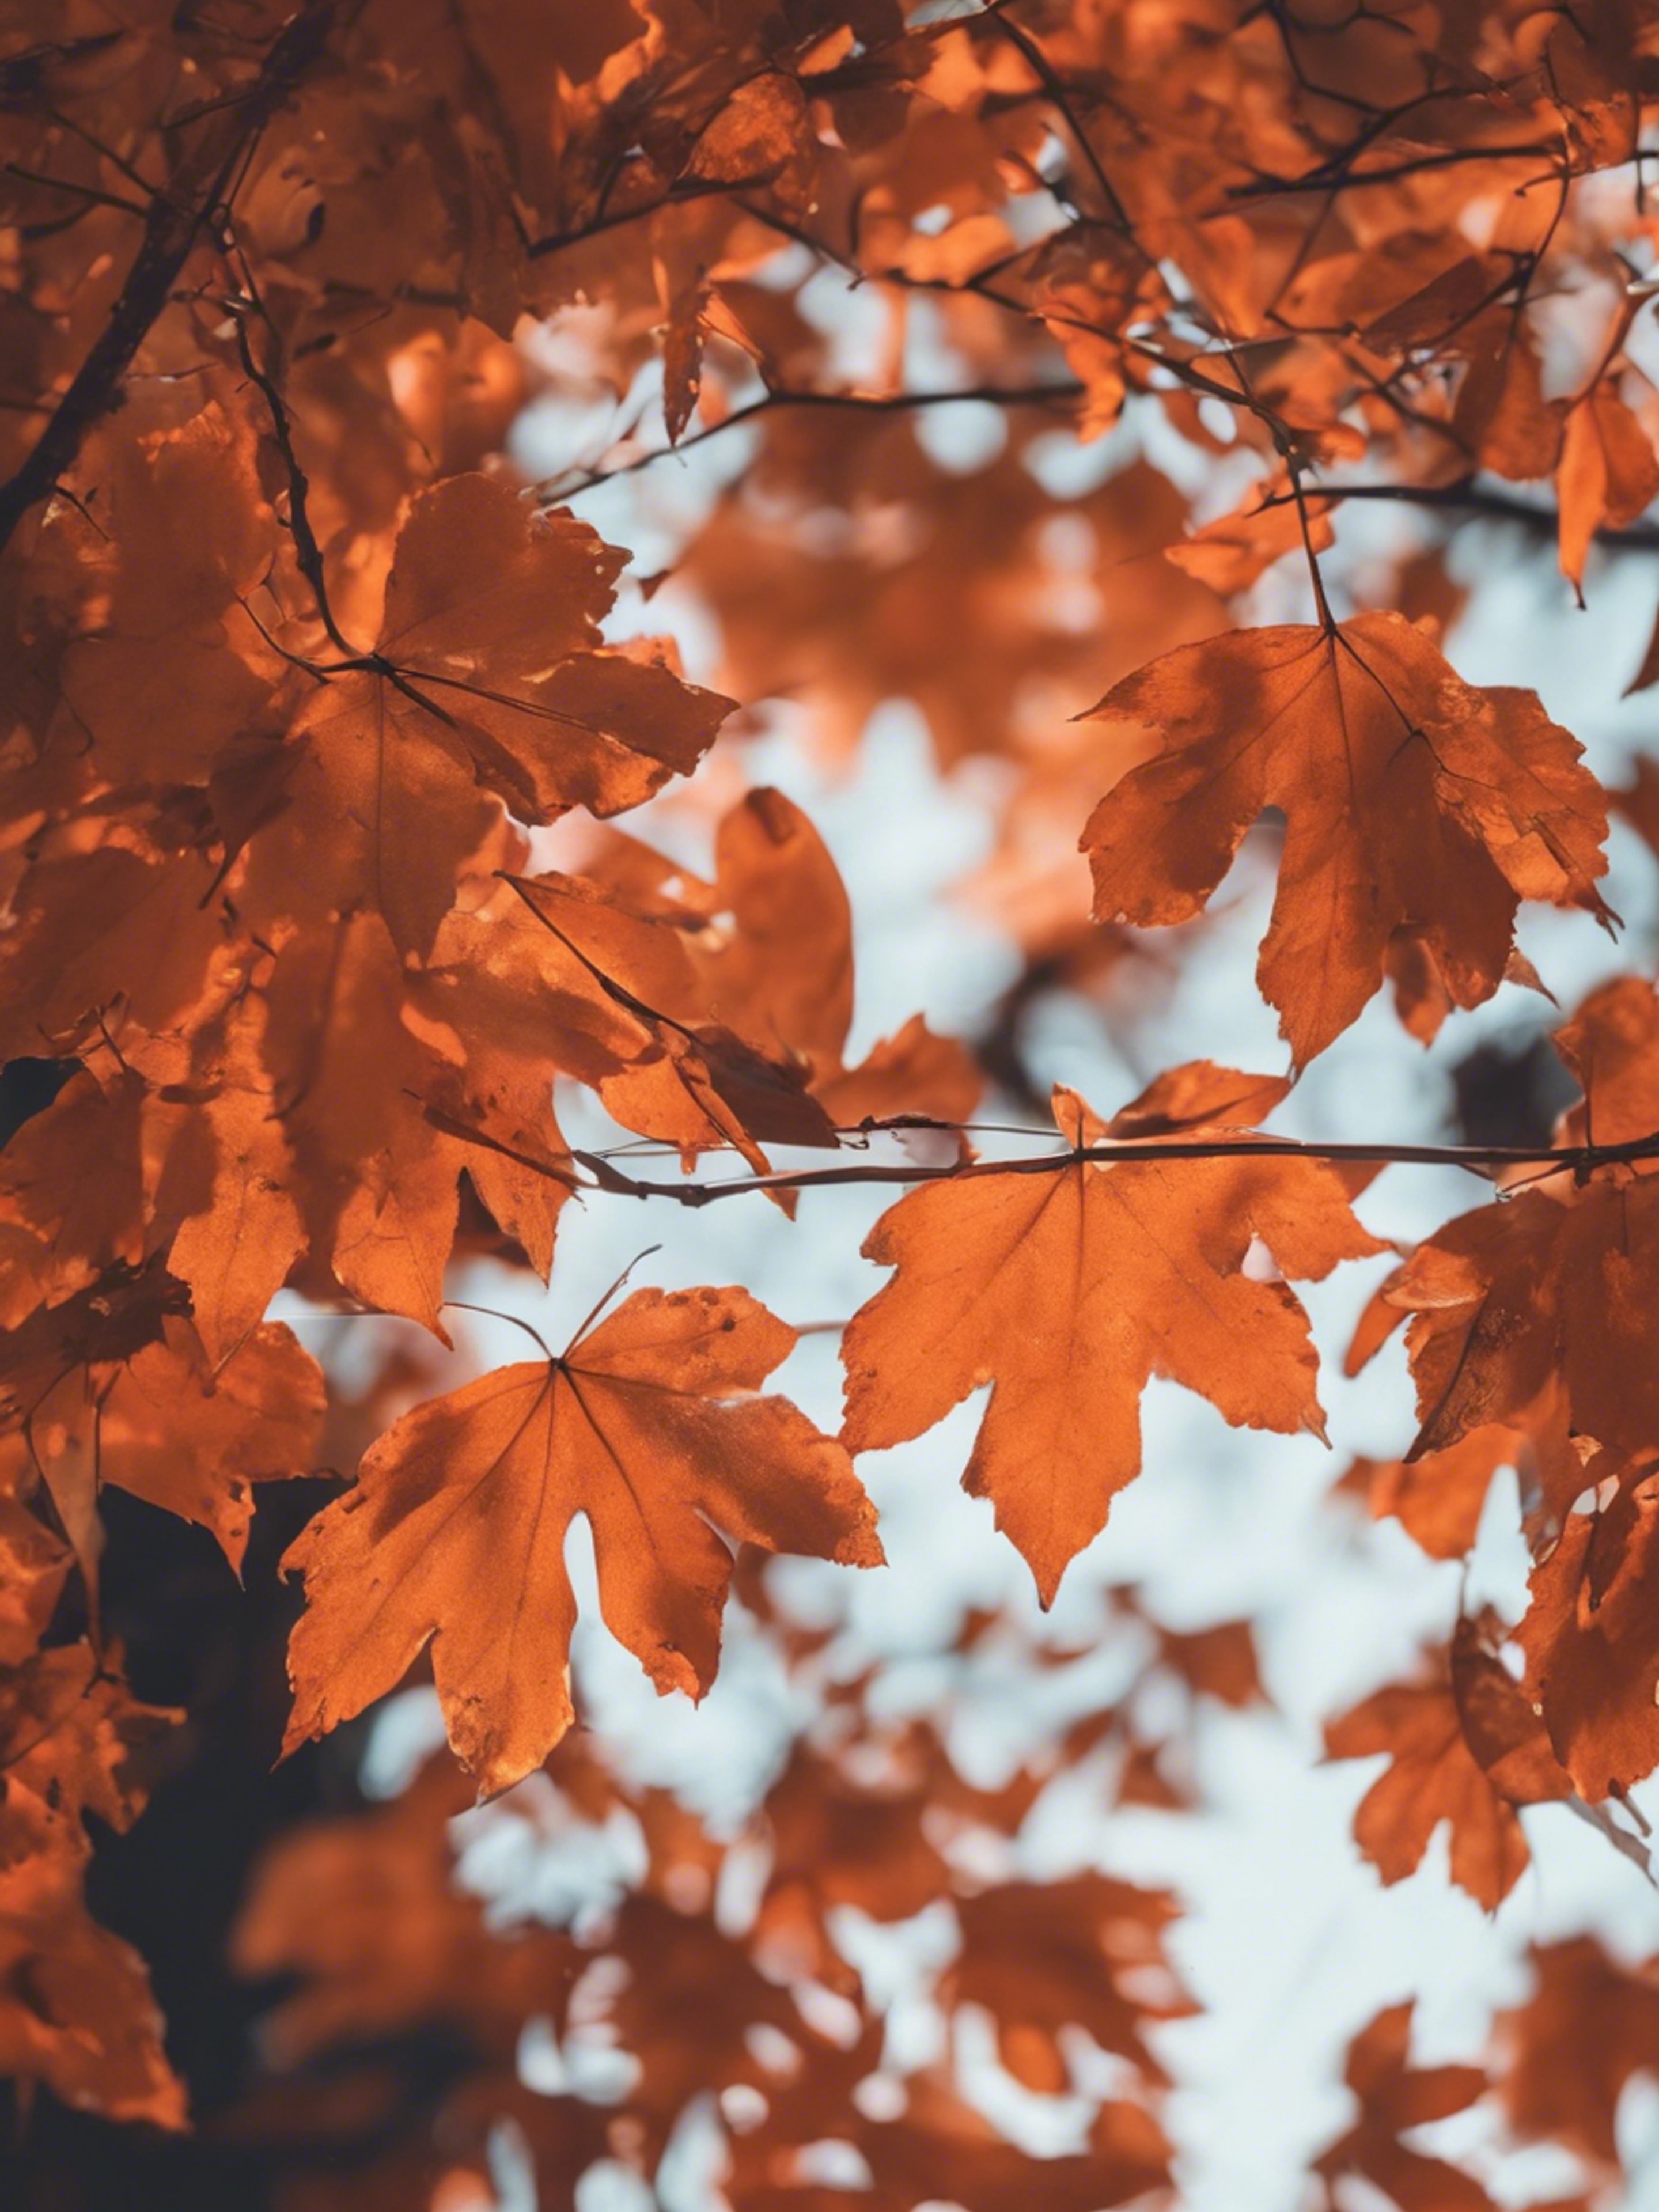 Glowing neon orange autumn leaves falling from a tree at dusk. Wallpaper[8b819f0b5bed469d9458]